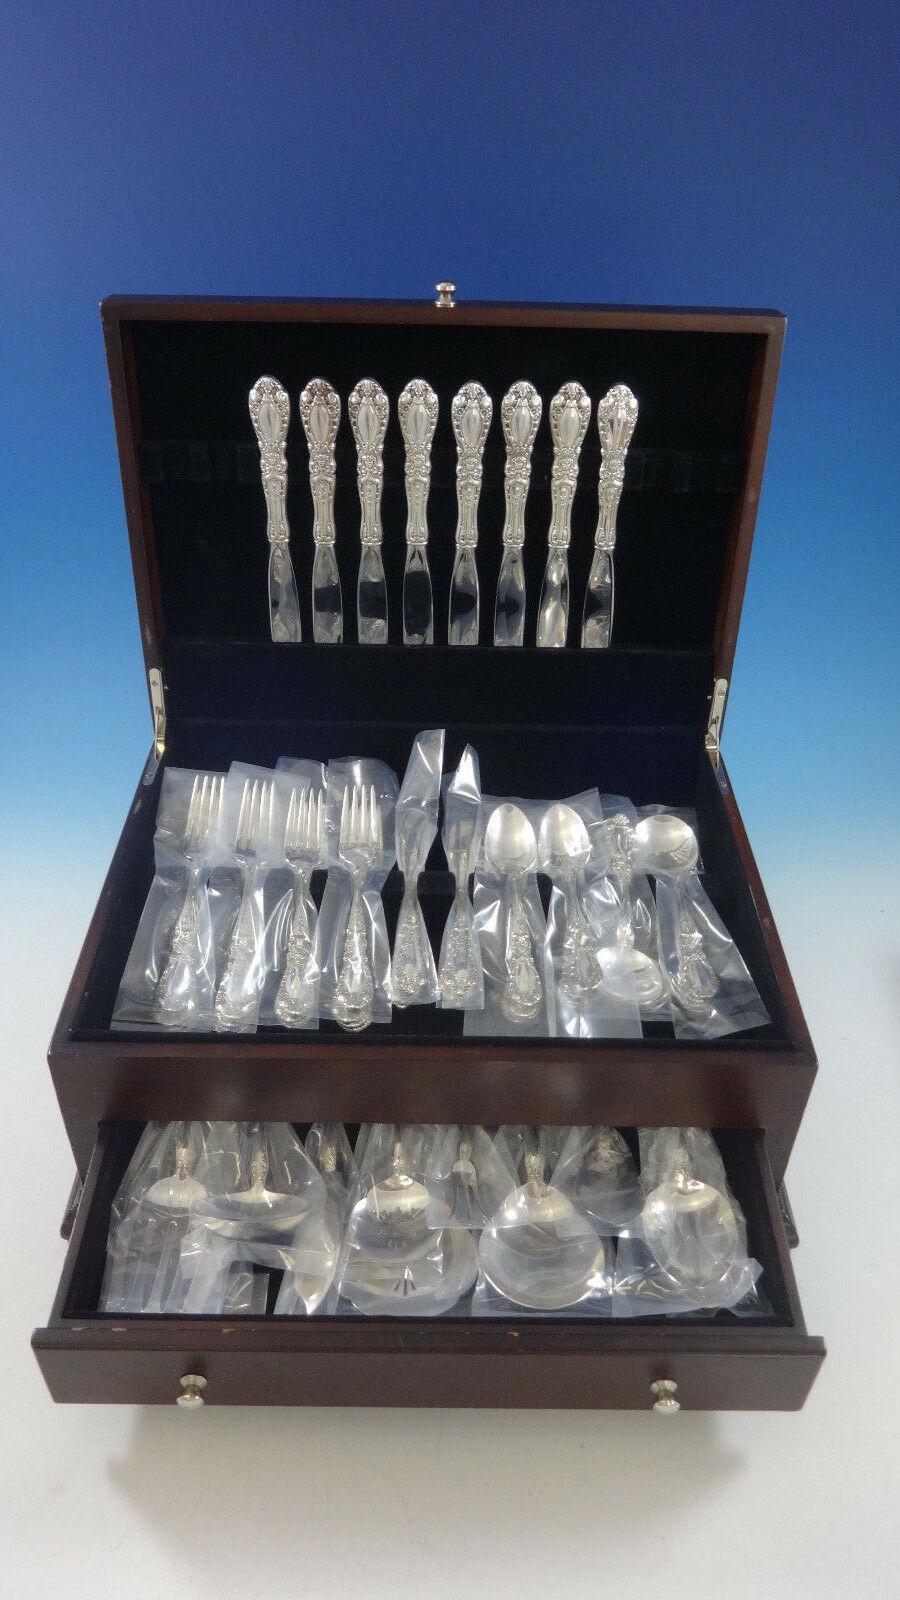 Beautiful Prince Eugene by Alvin sterling silver flatware set of 59 pieces. This set includes:

8 knives, 8 3/4